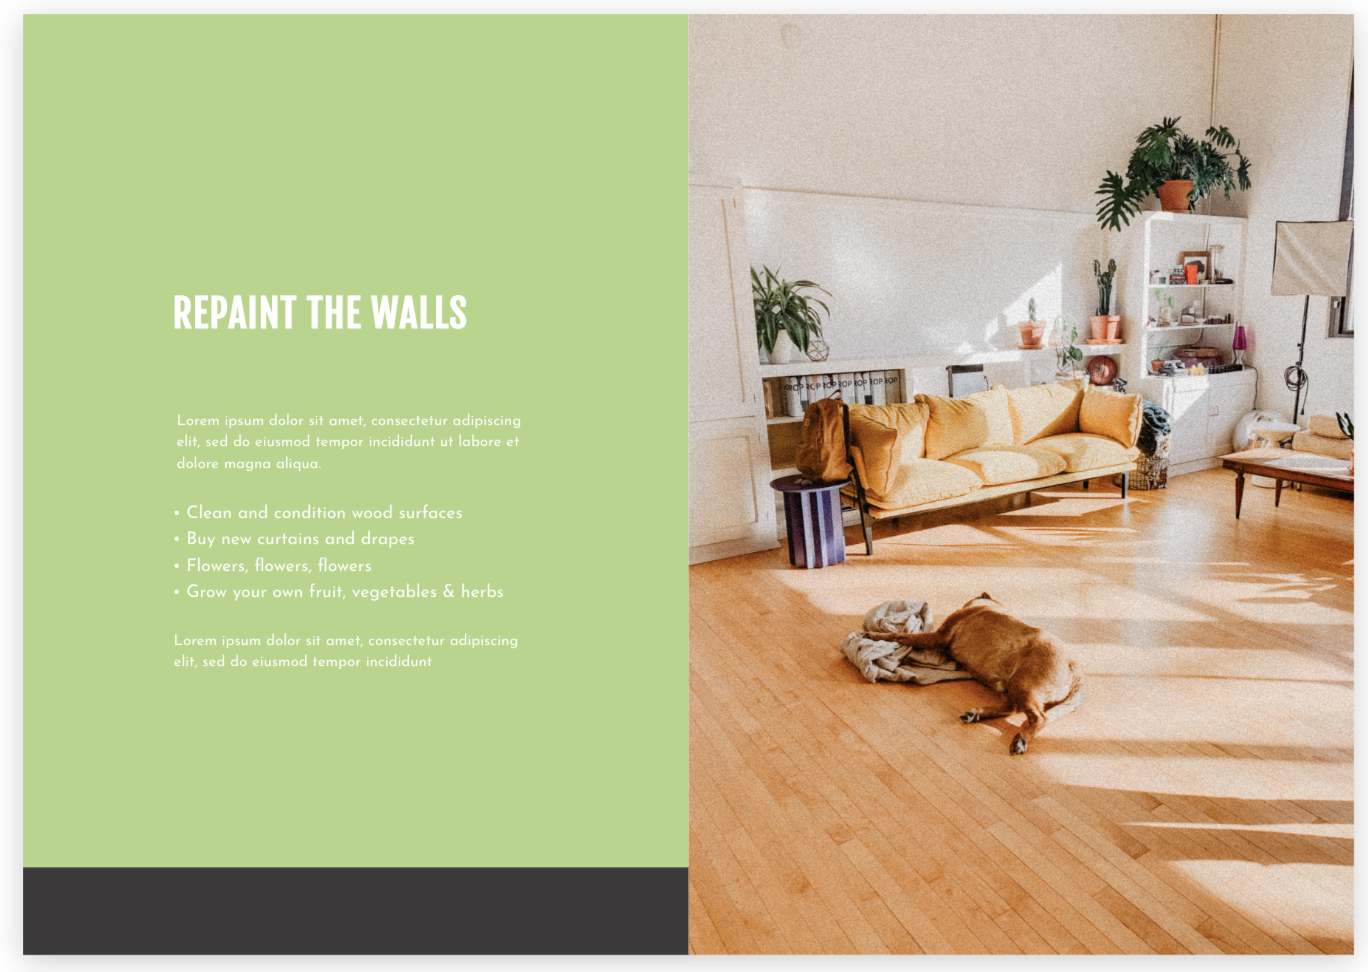 Living room with dog on floor and text on left side if image in a green background.